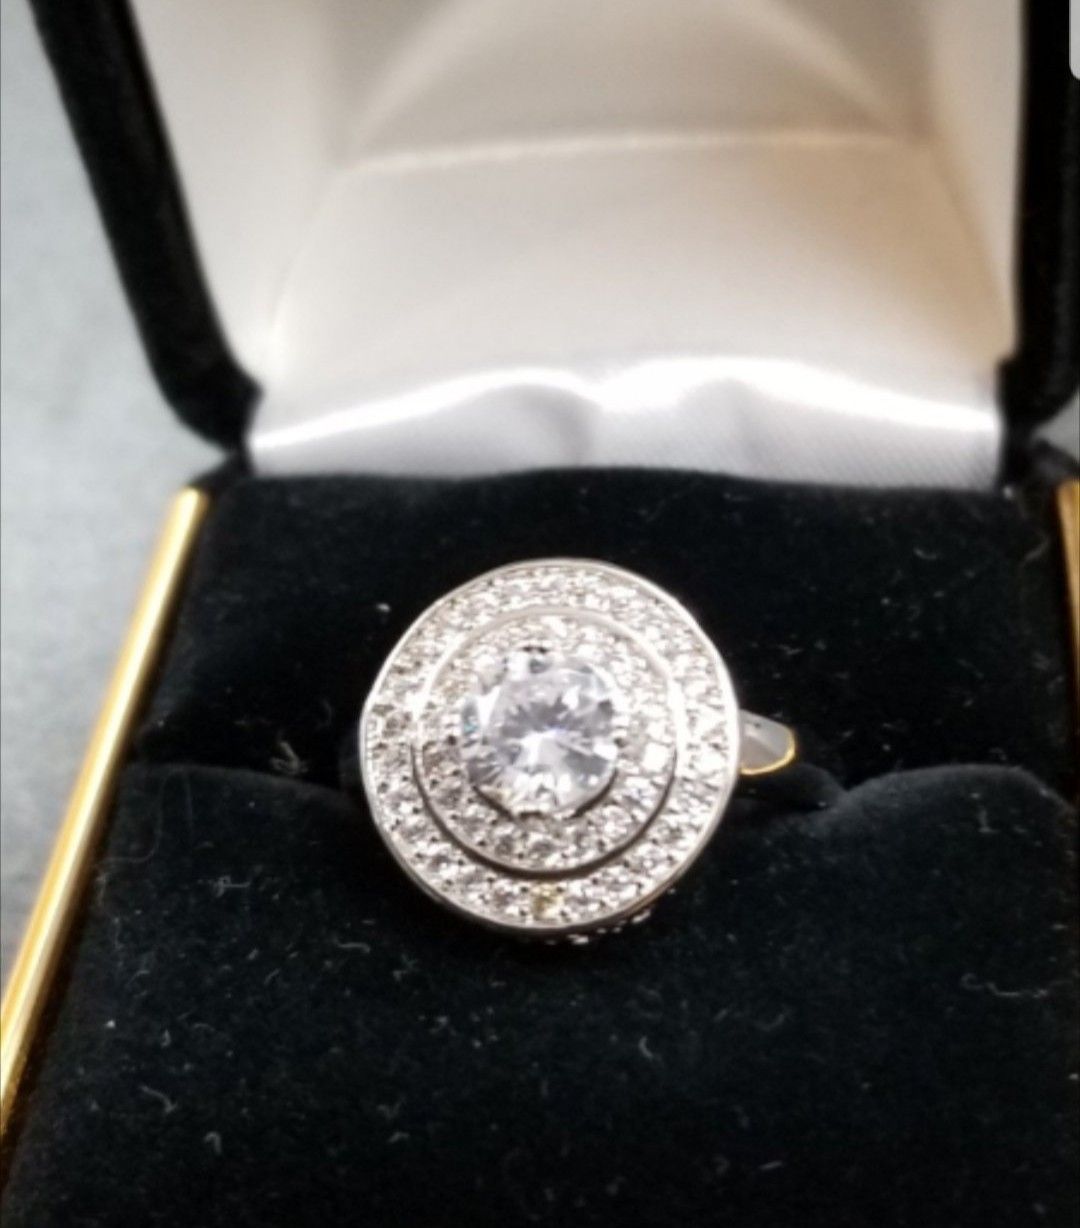 $10 new size 8 or 9 silver plated CZ ring